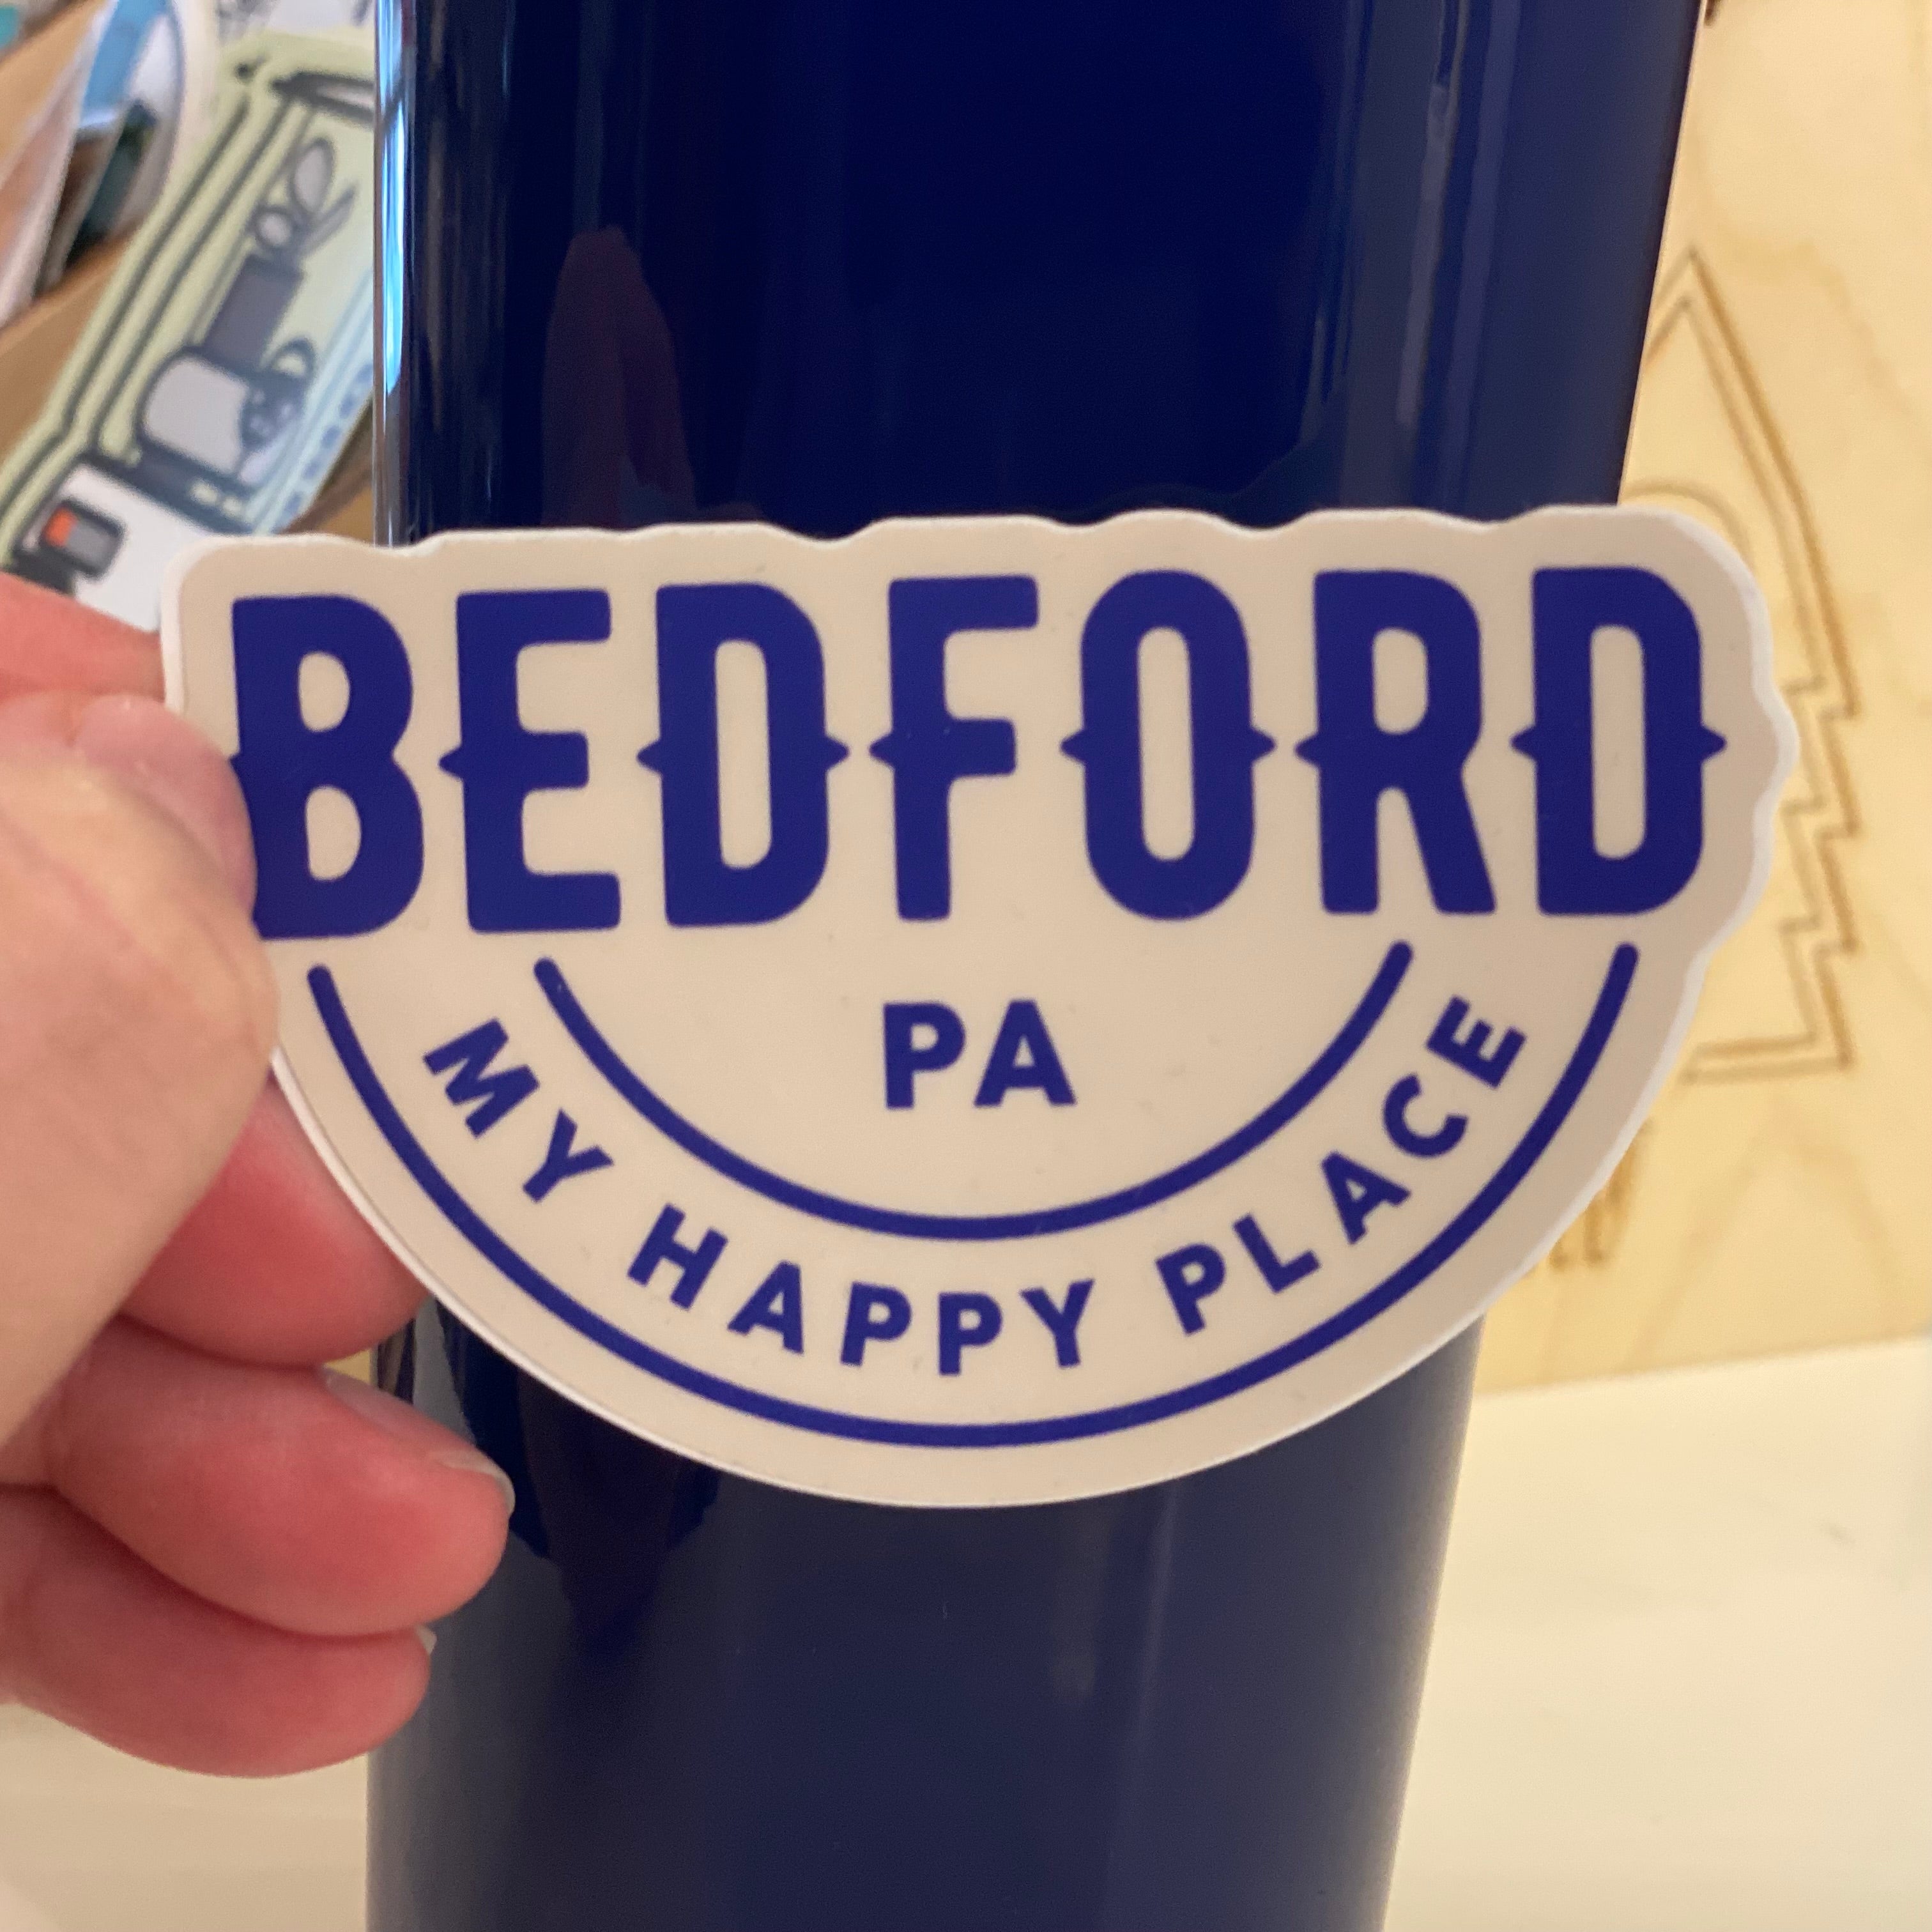 "My Happy Place" Bedford, PA Sticker